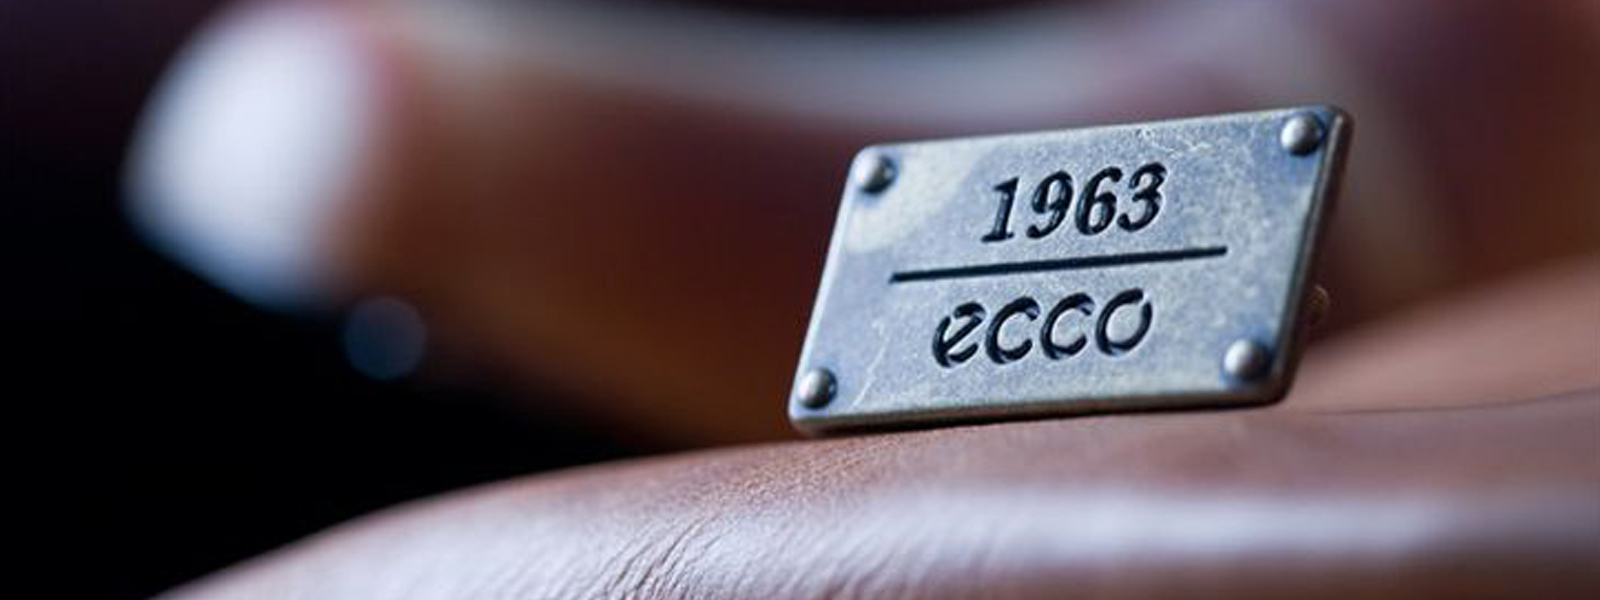 ECCO - A 60 year heritage in shoemaking